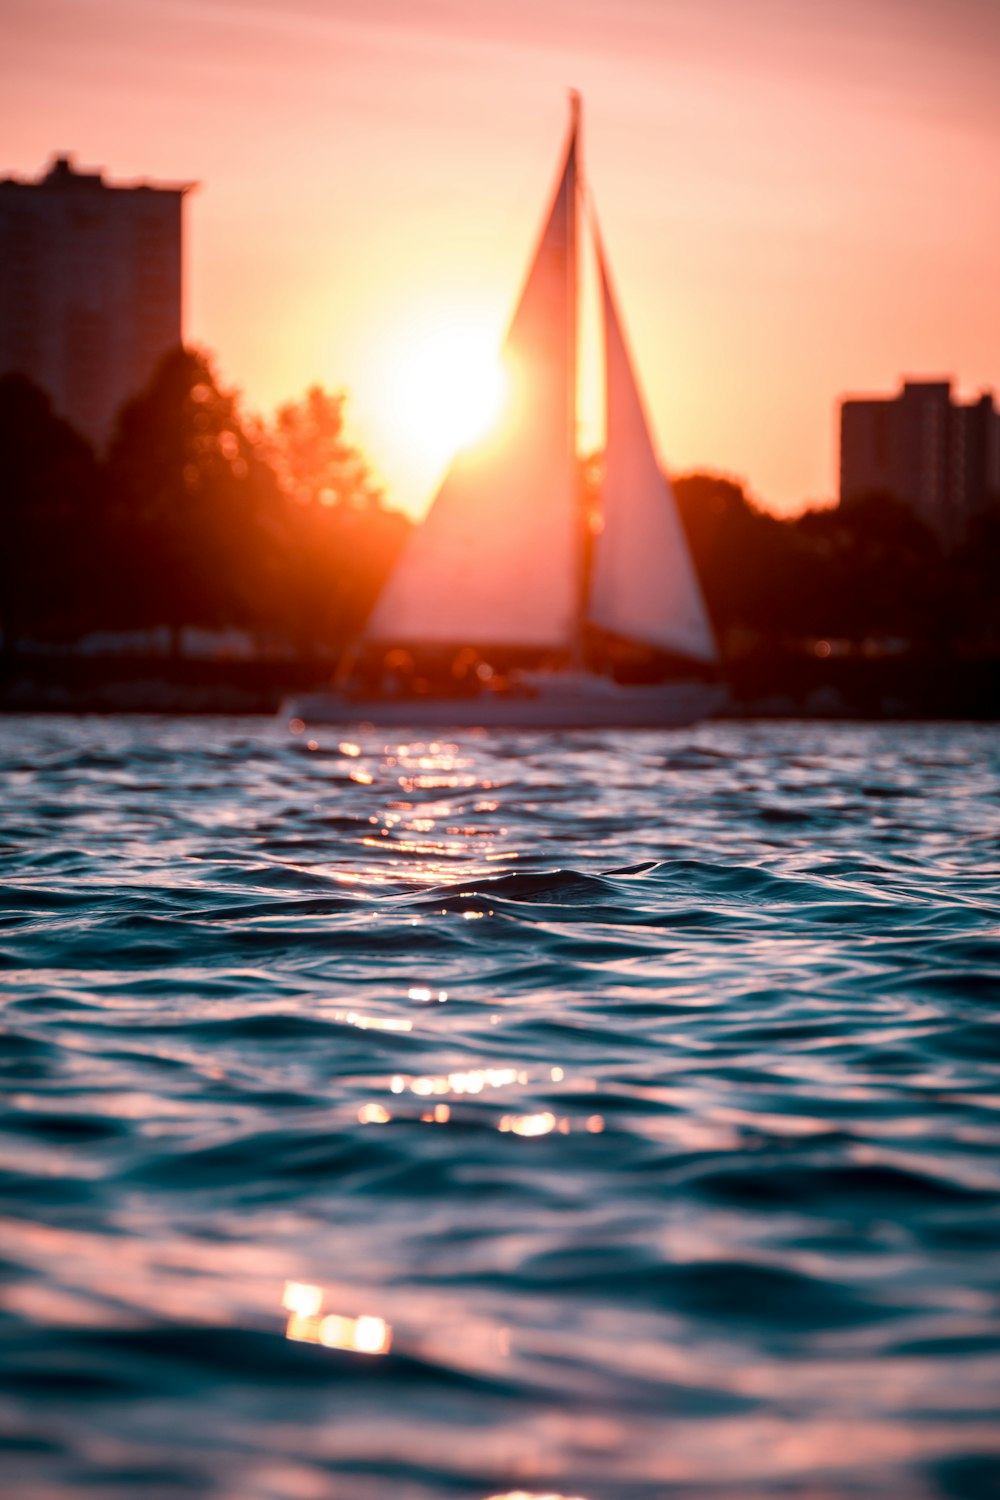 sailing boat on body of water during golden hour